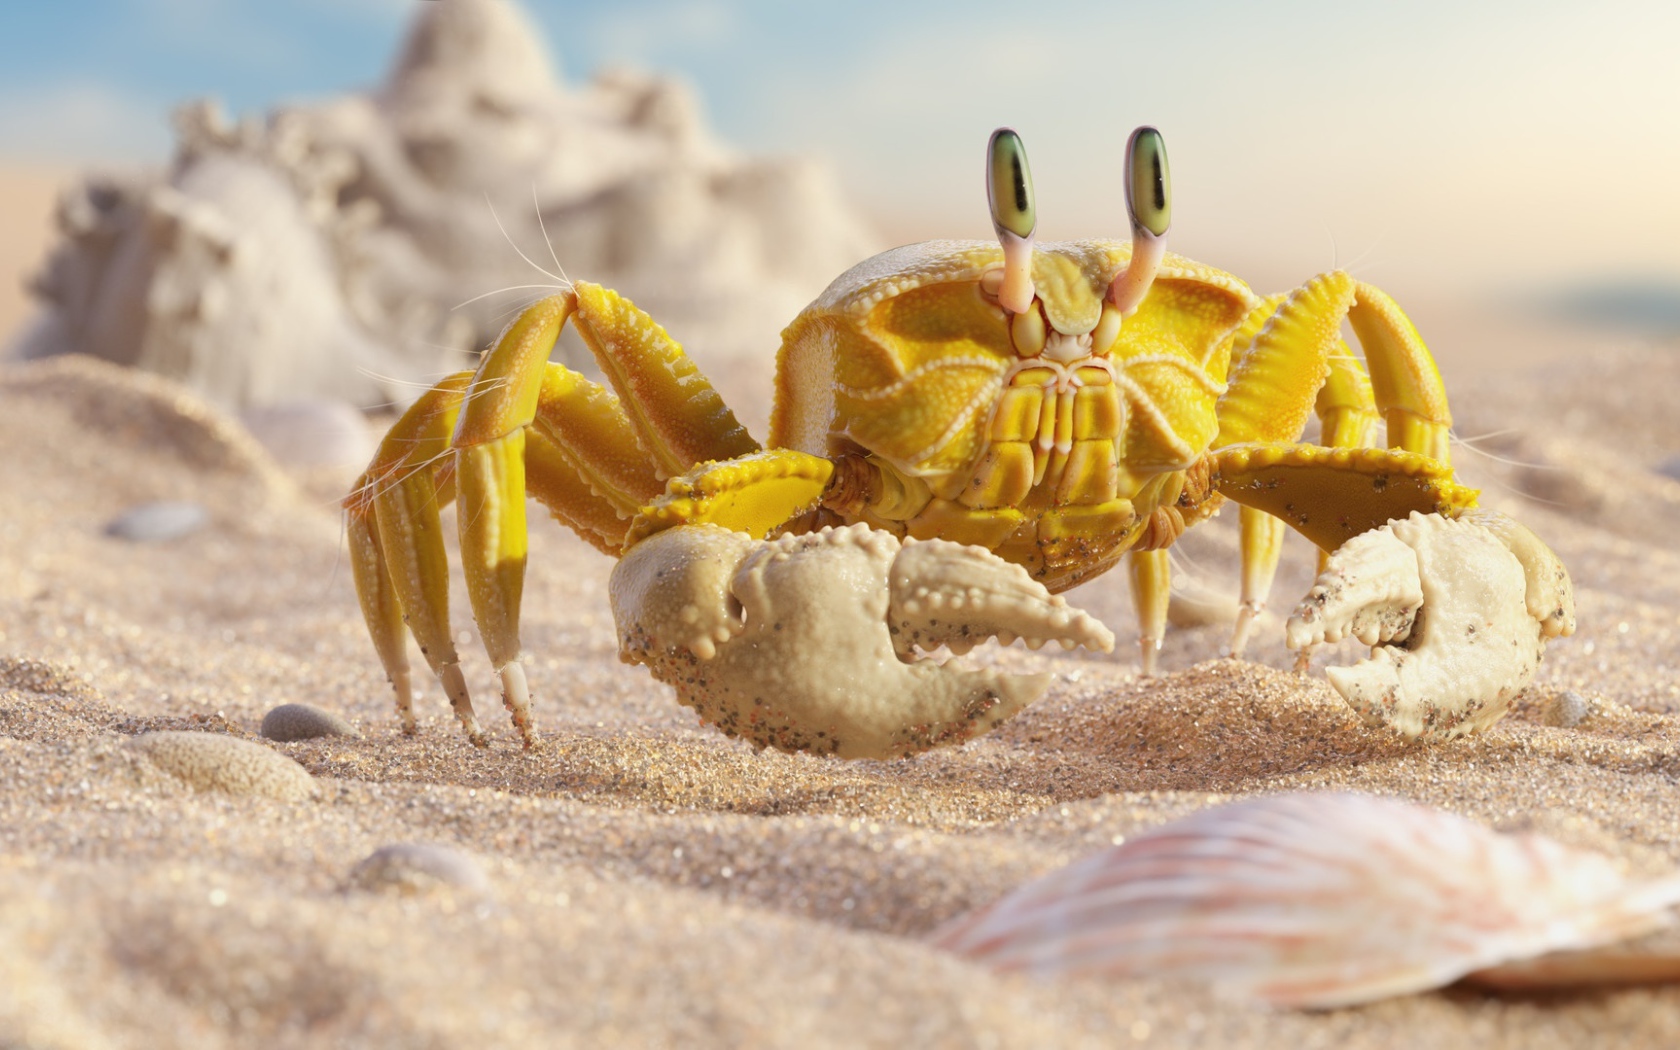 Yellow crab on white sand with shells